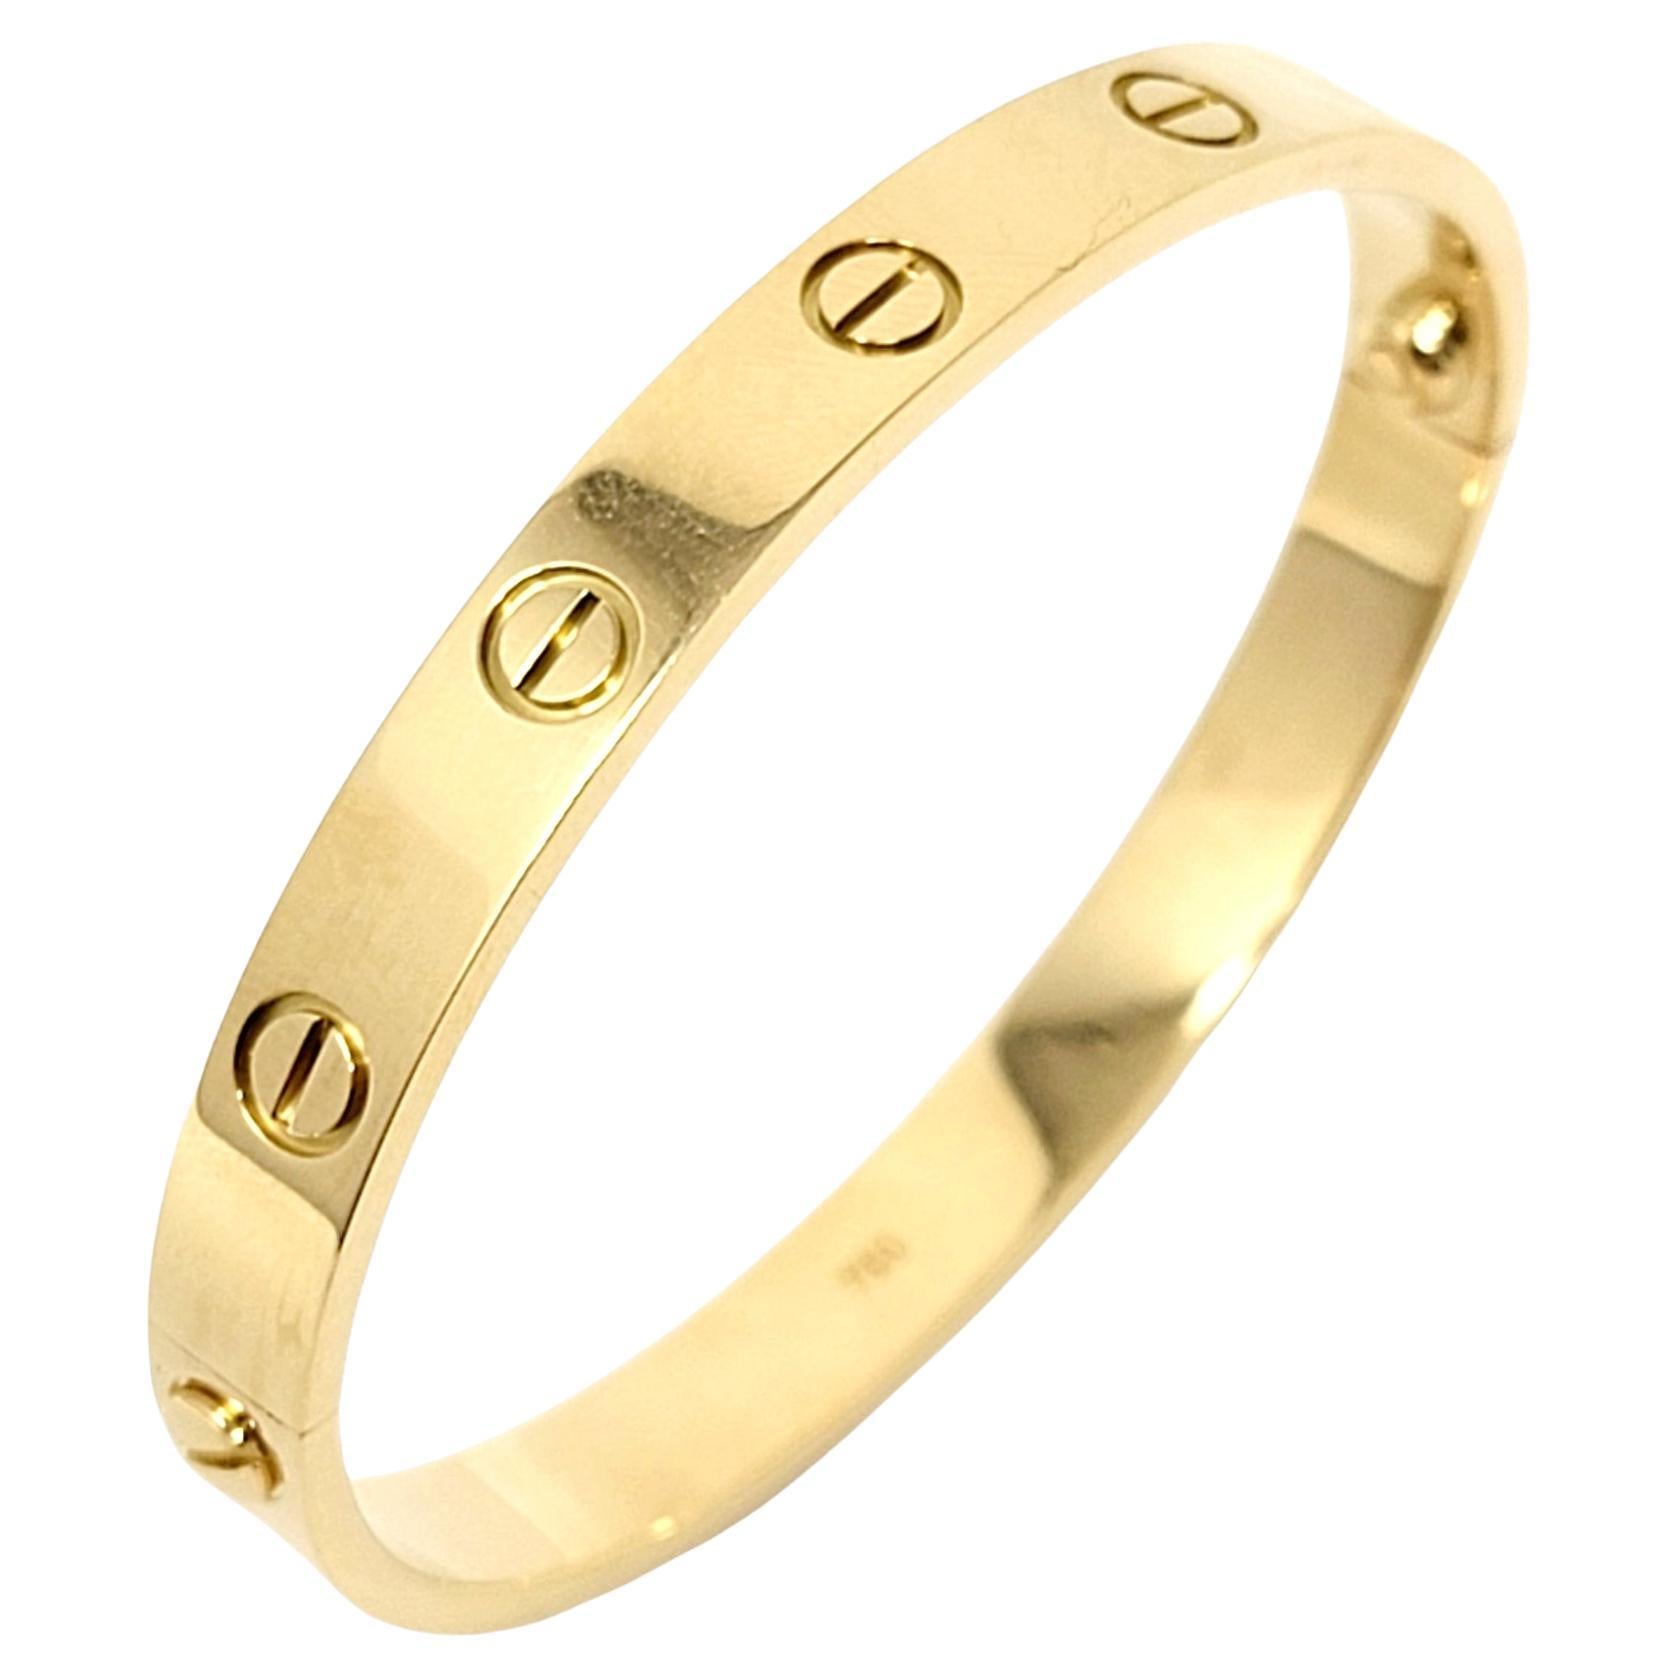 Buy 316L Stainless steel Gold Plated Cartier Bangle